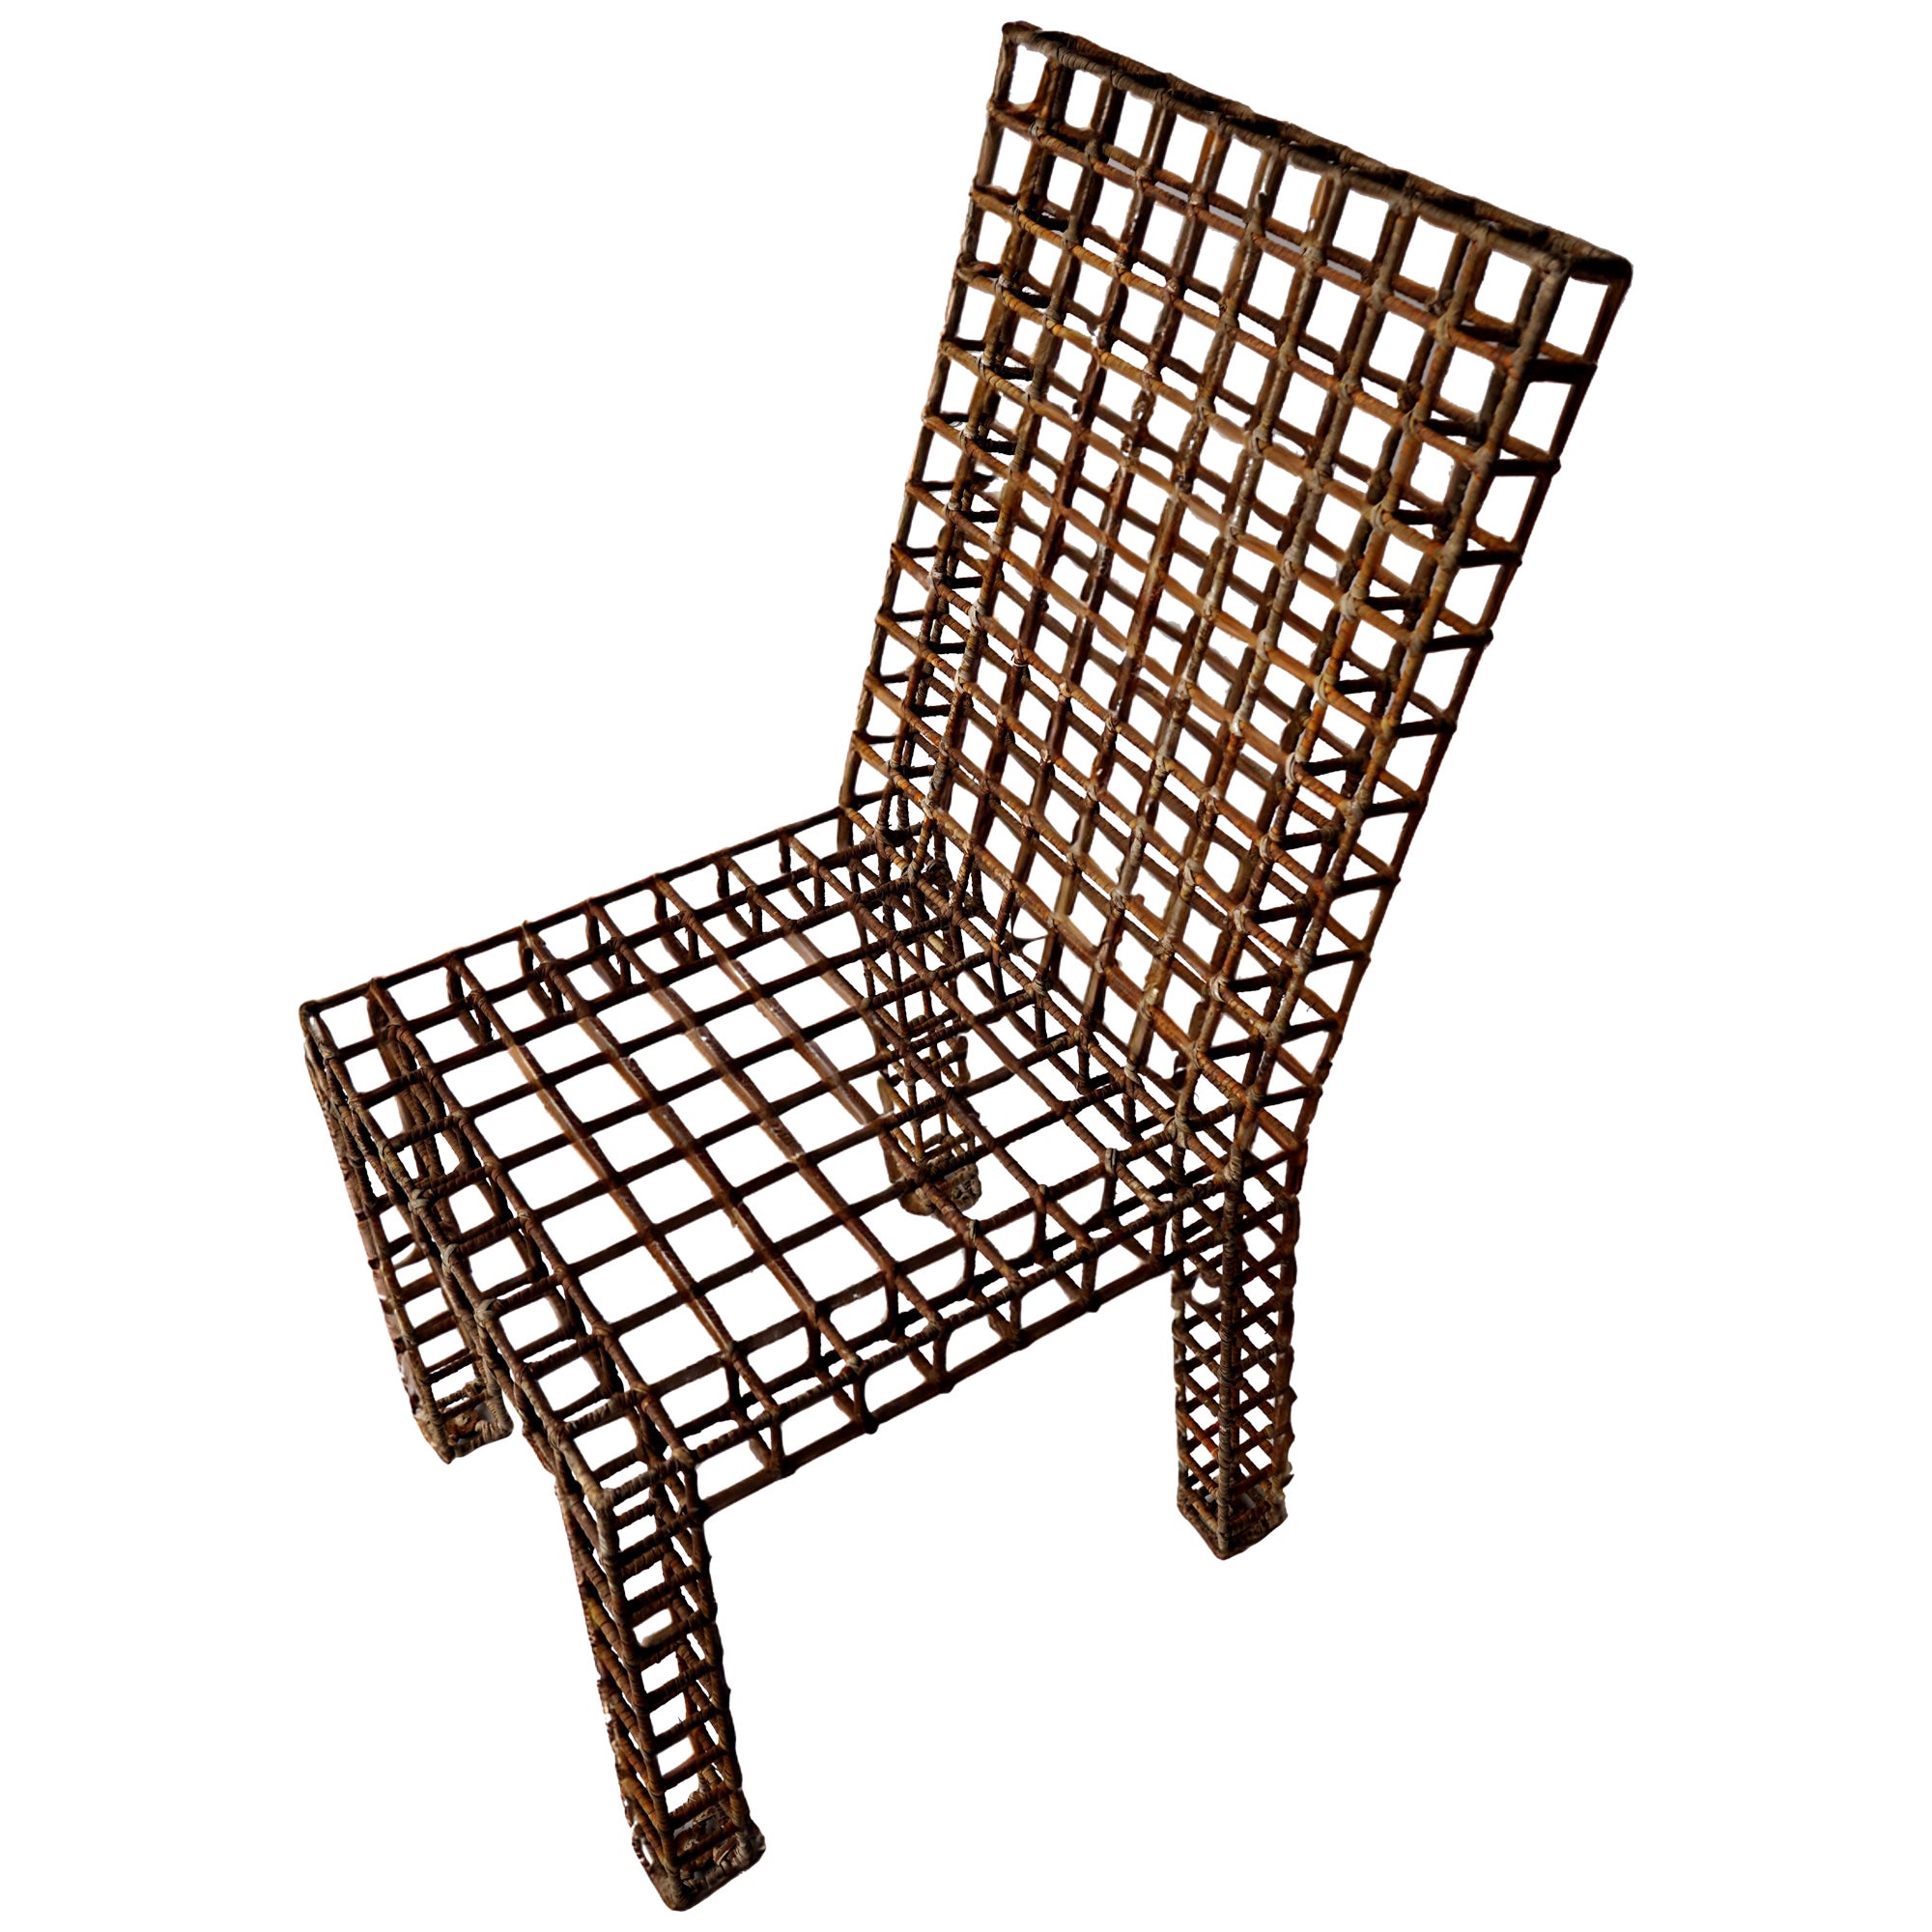 Gridded Metal and Rattan Chair (6 available)